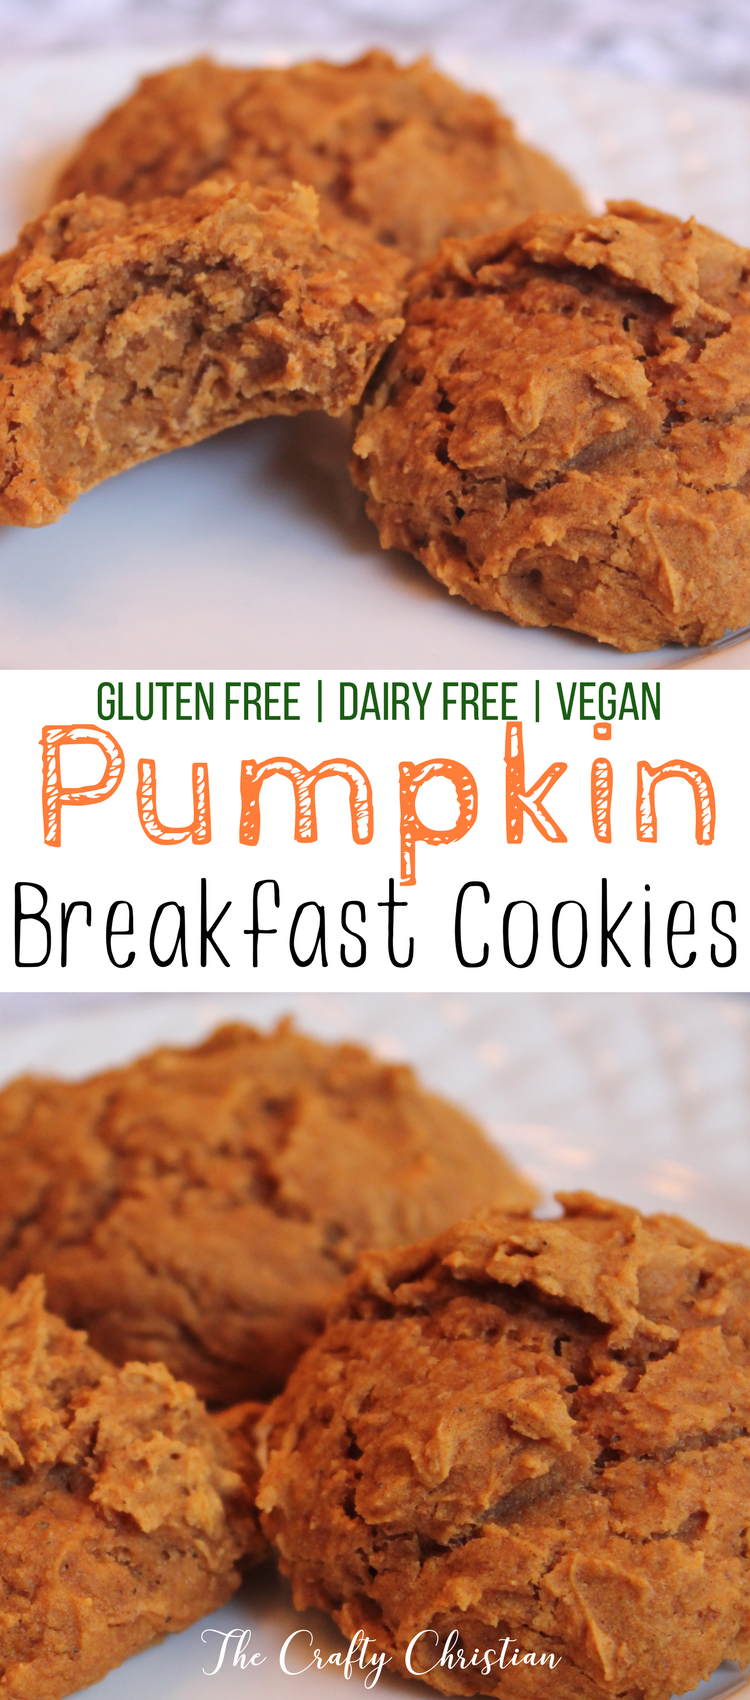 Pumpkin cookies are just about a rite of passage once Fall hits.  But if you’re looking to stay healthy through the holiday